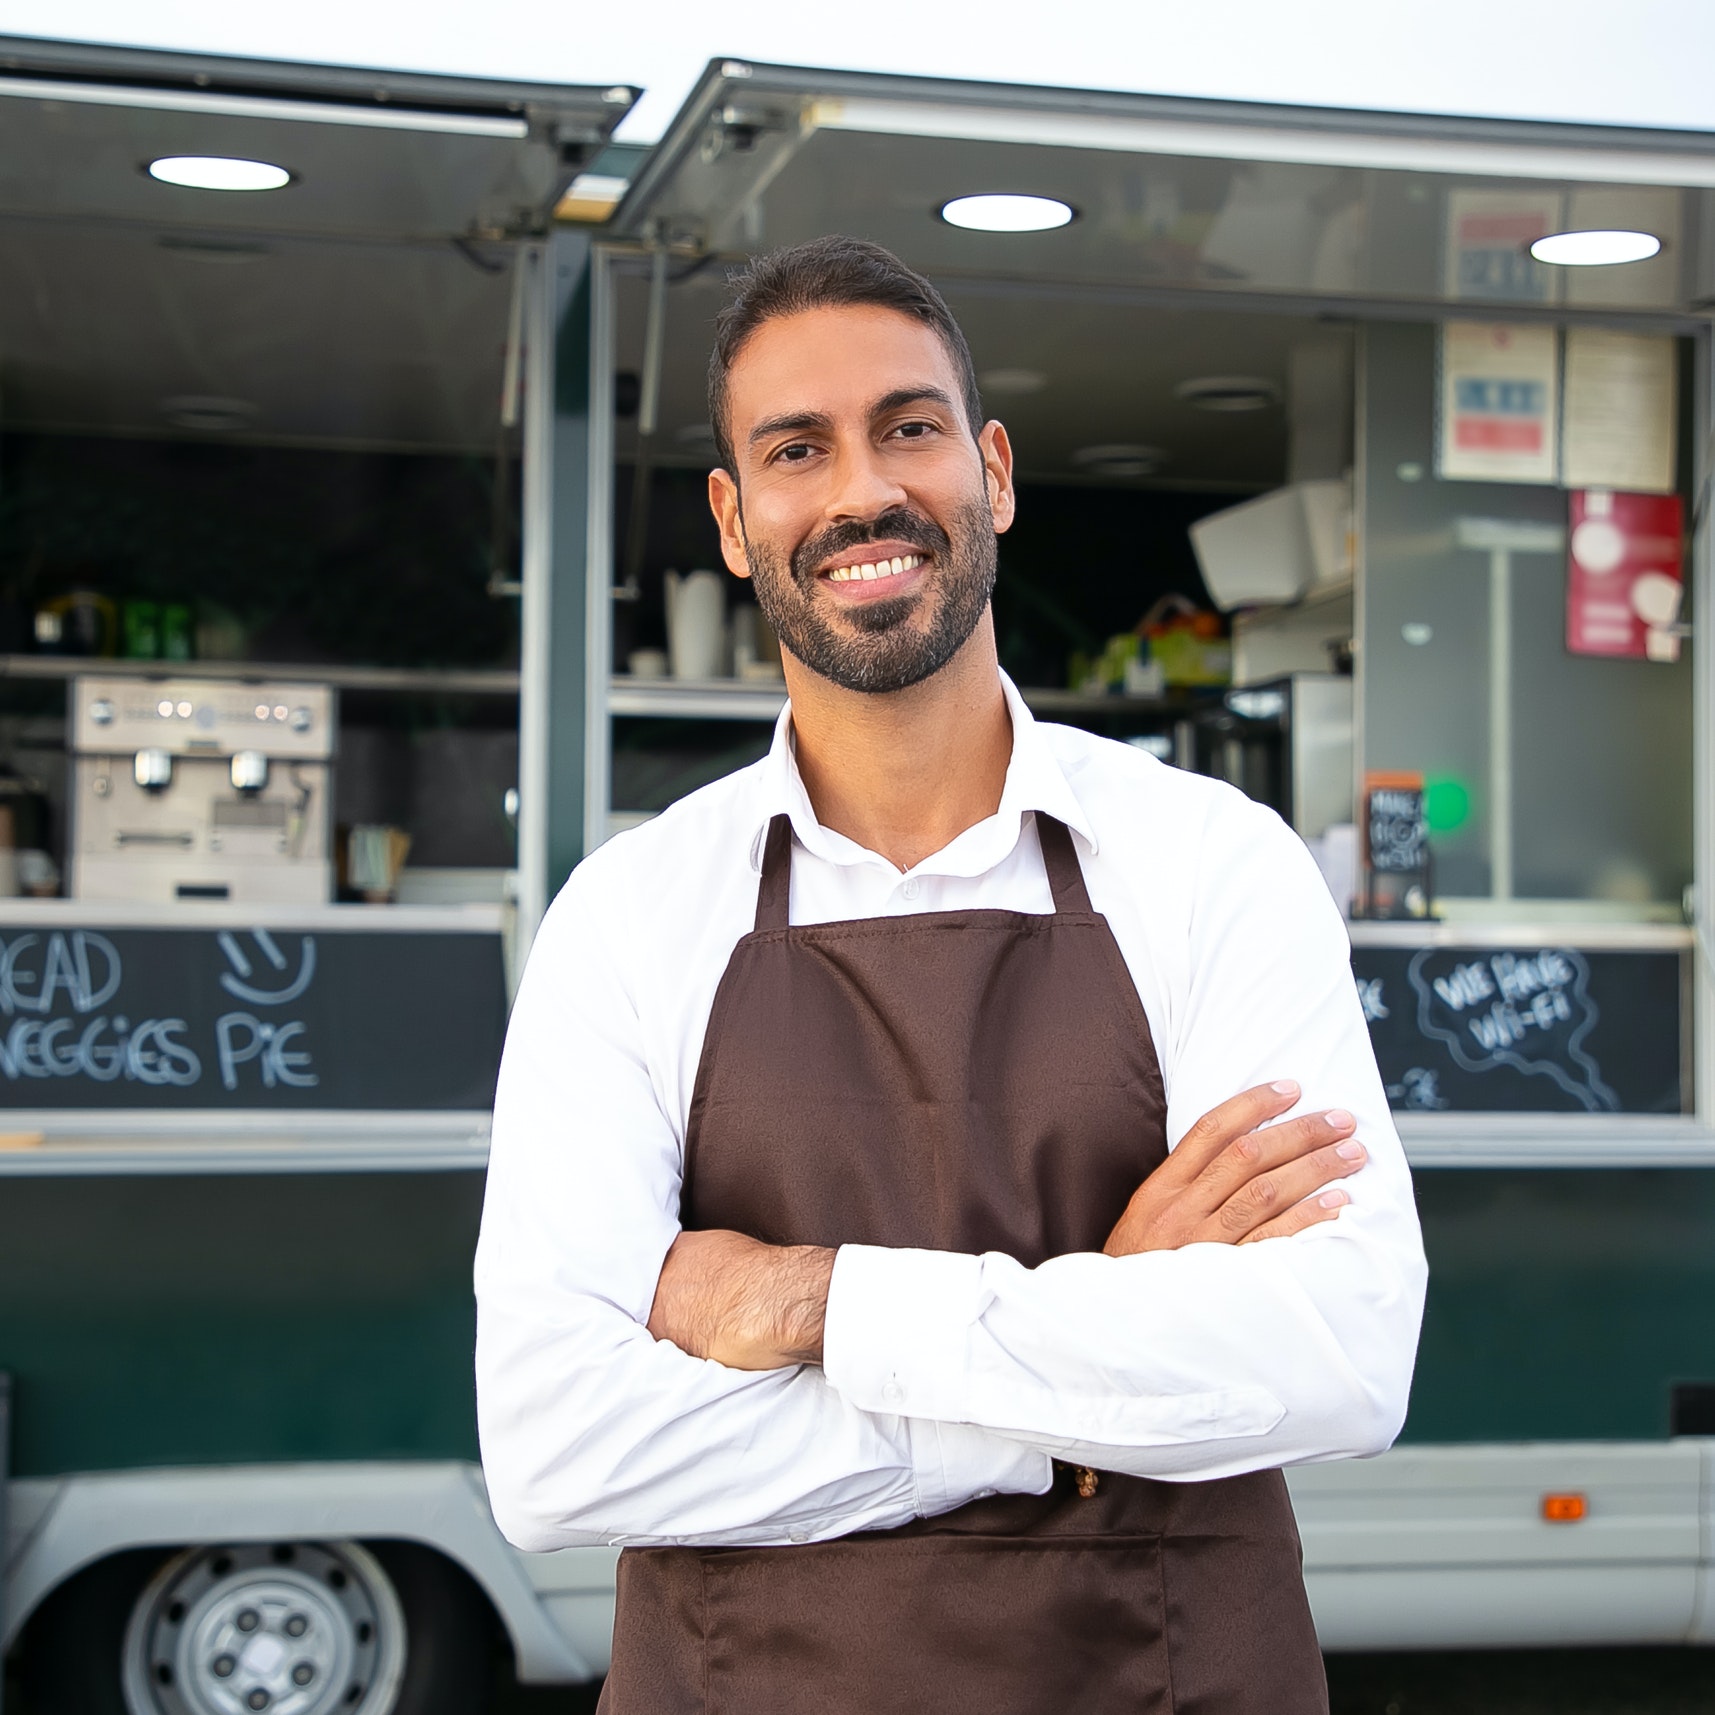 Smiling man outside food truck